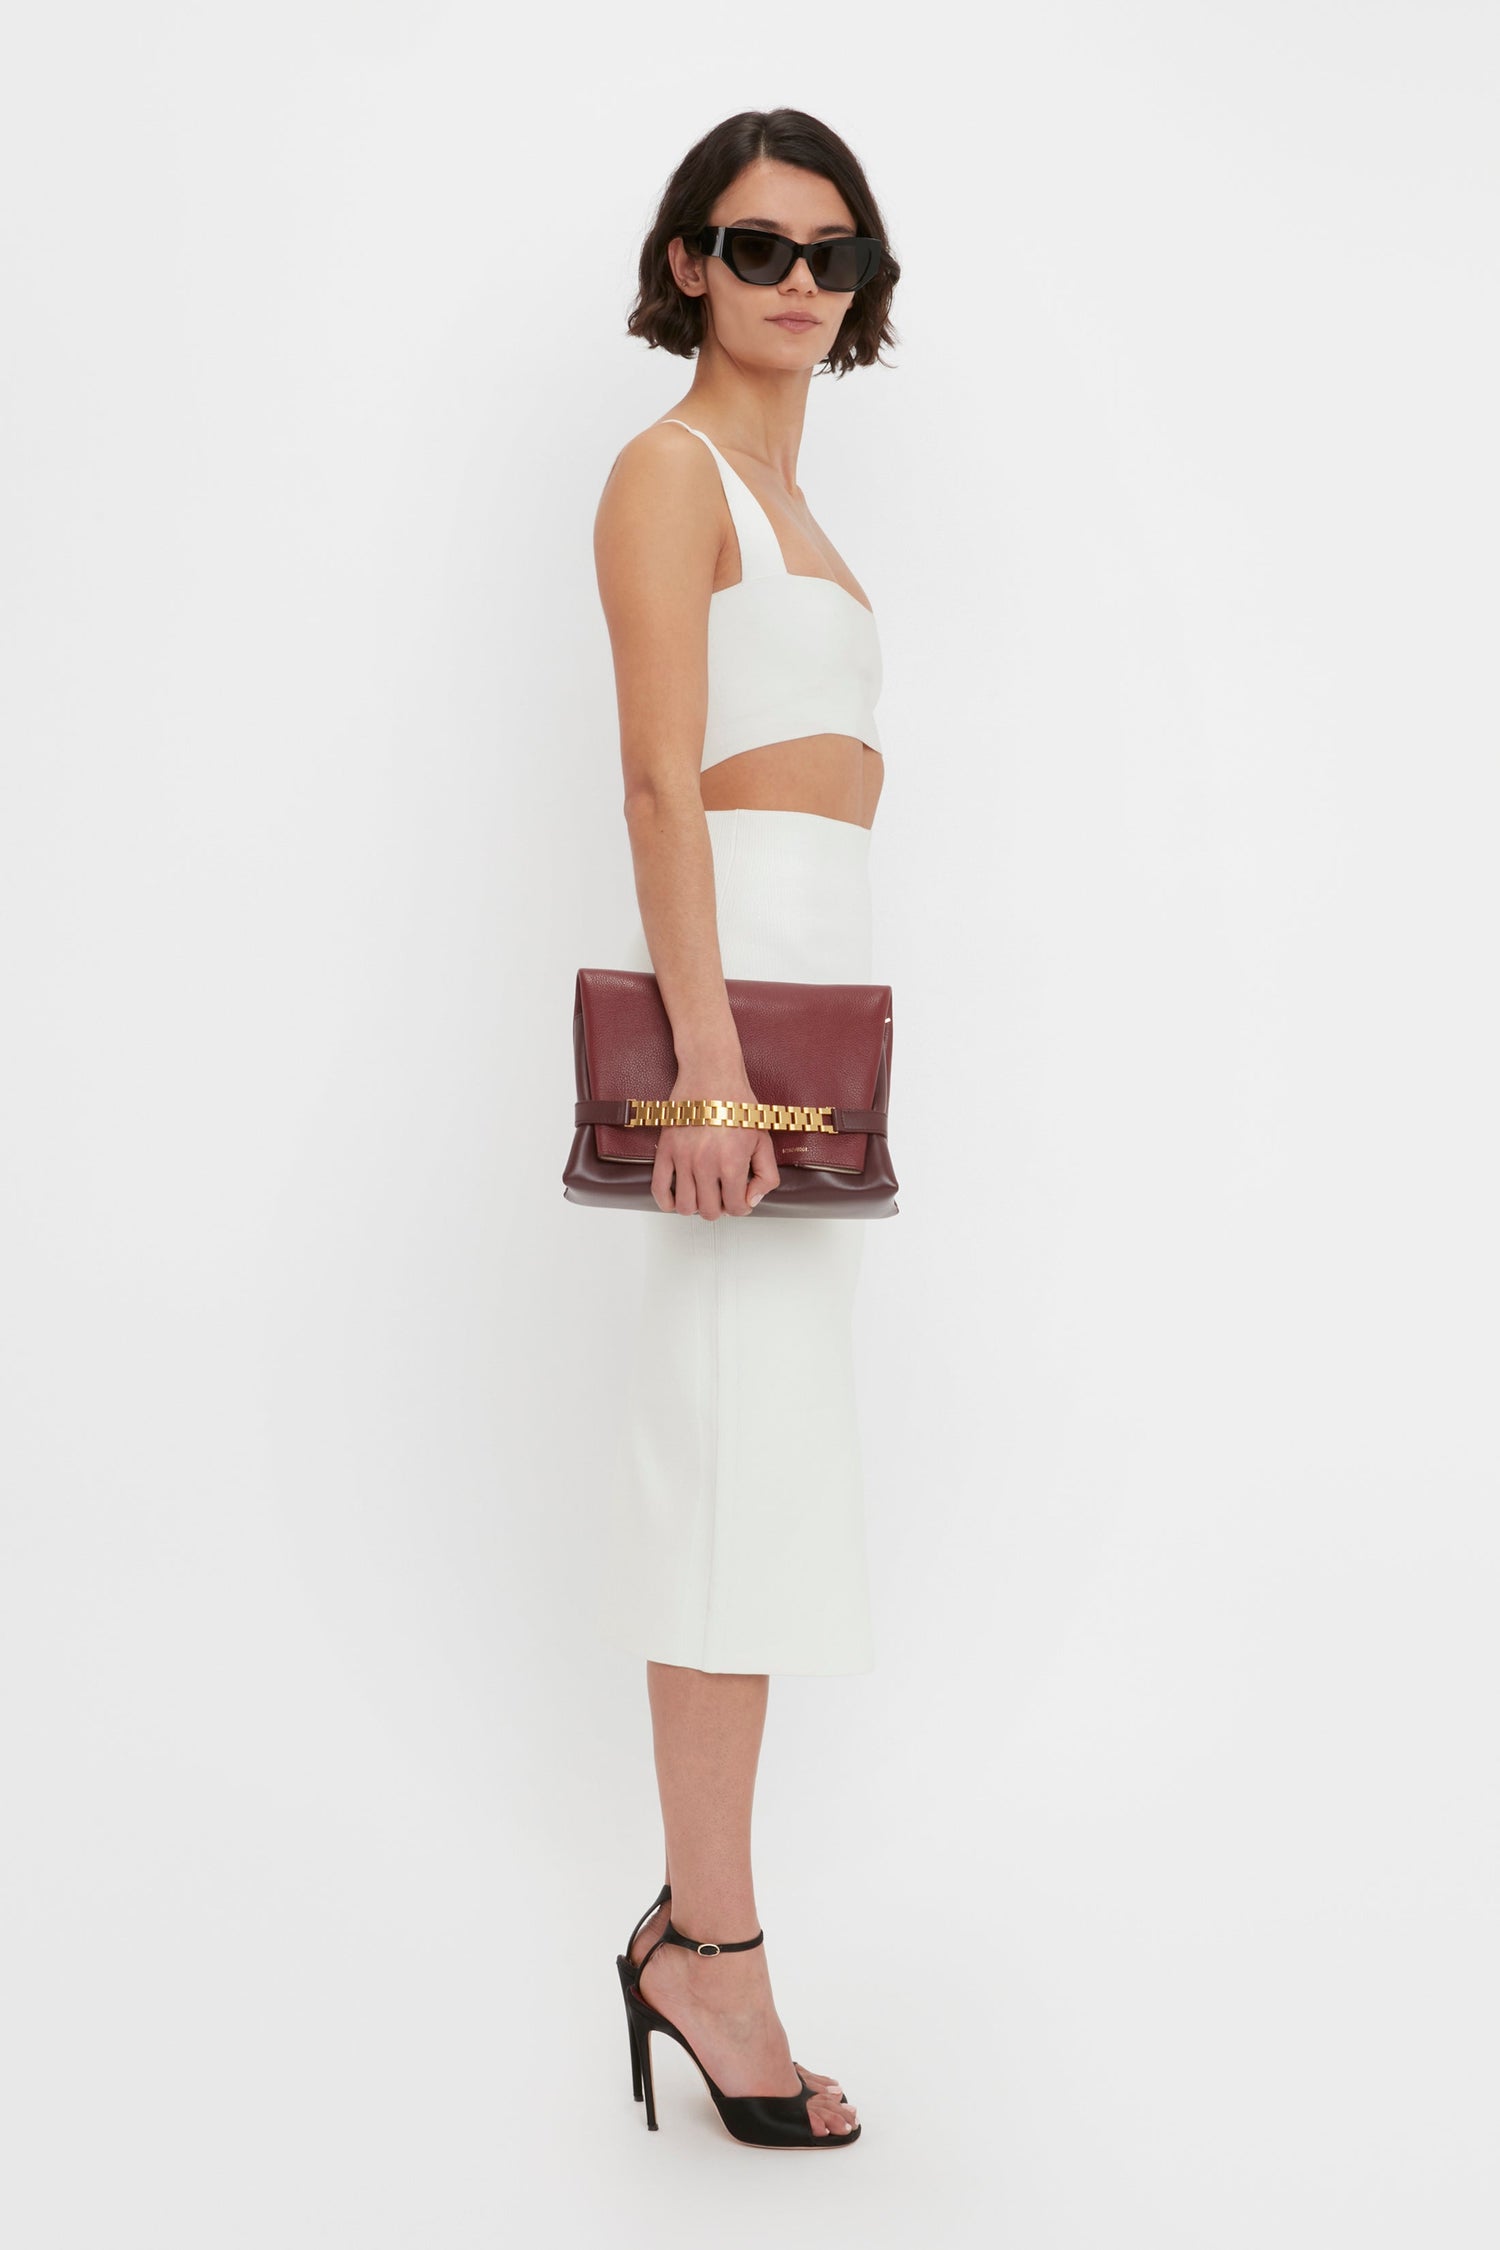 A woman in a Victoria Beckham VB Body Strap Bandeau Top In White and VB Body Fitted Midi Skirt, holding a maroon handbag, wearing sunglasses and black high heels, posing against a white background.